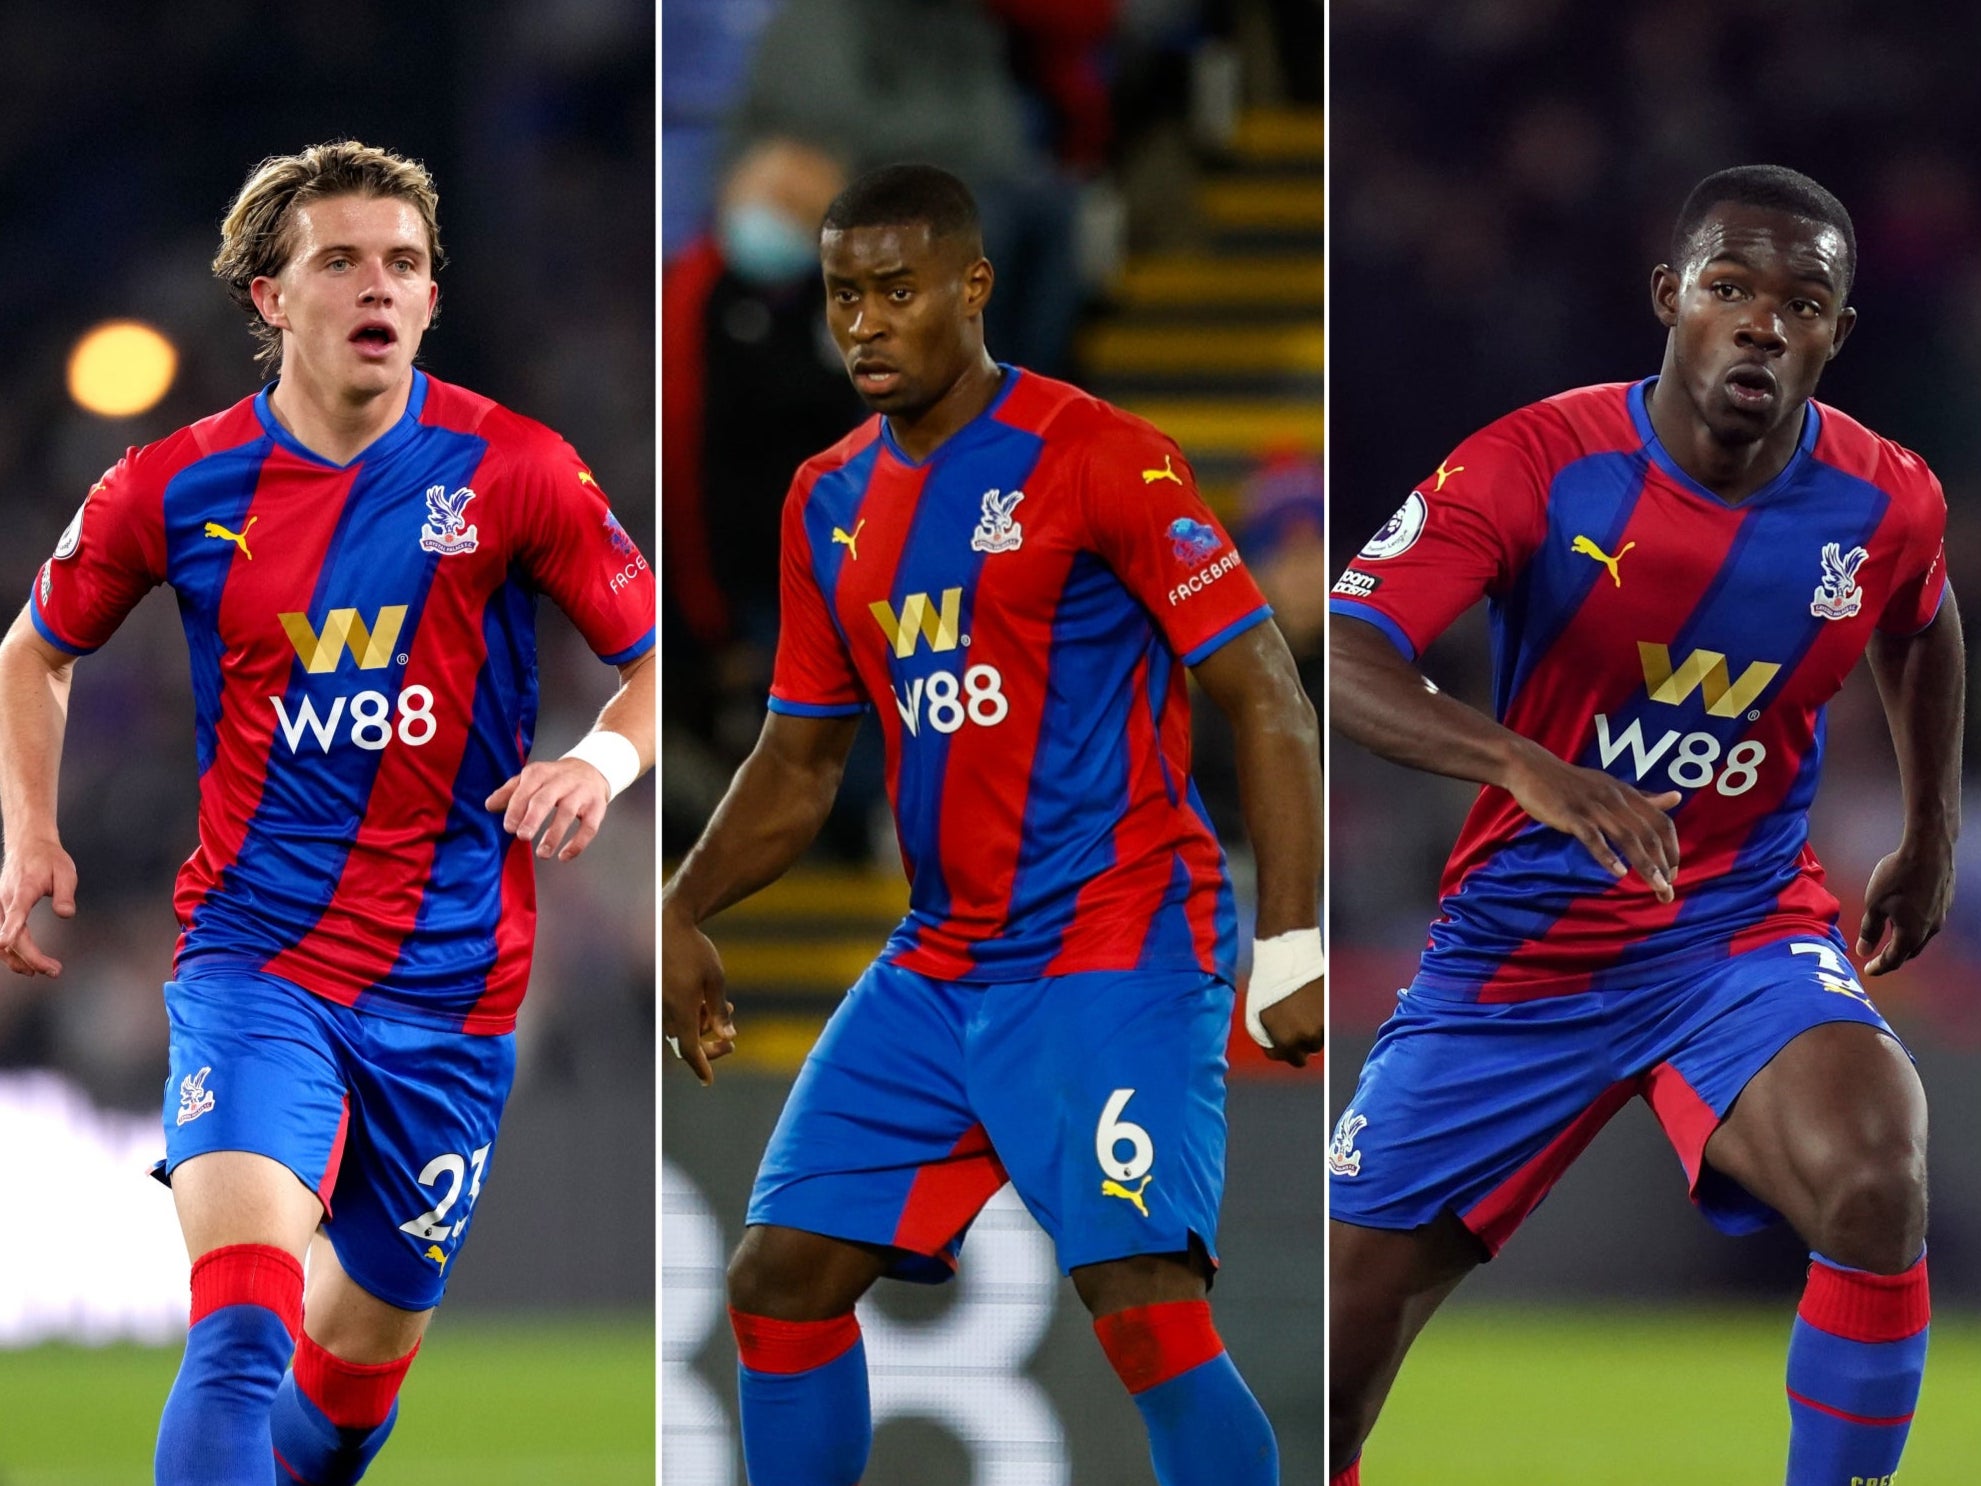 Crystal Palace trio Conor Gallagher, Marc Guehi and Tyrick Mitchell are hopeful of being in the next England squad